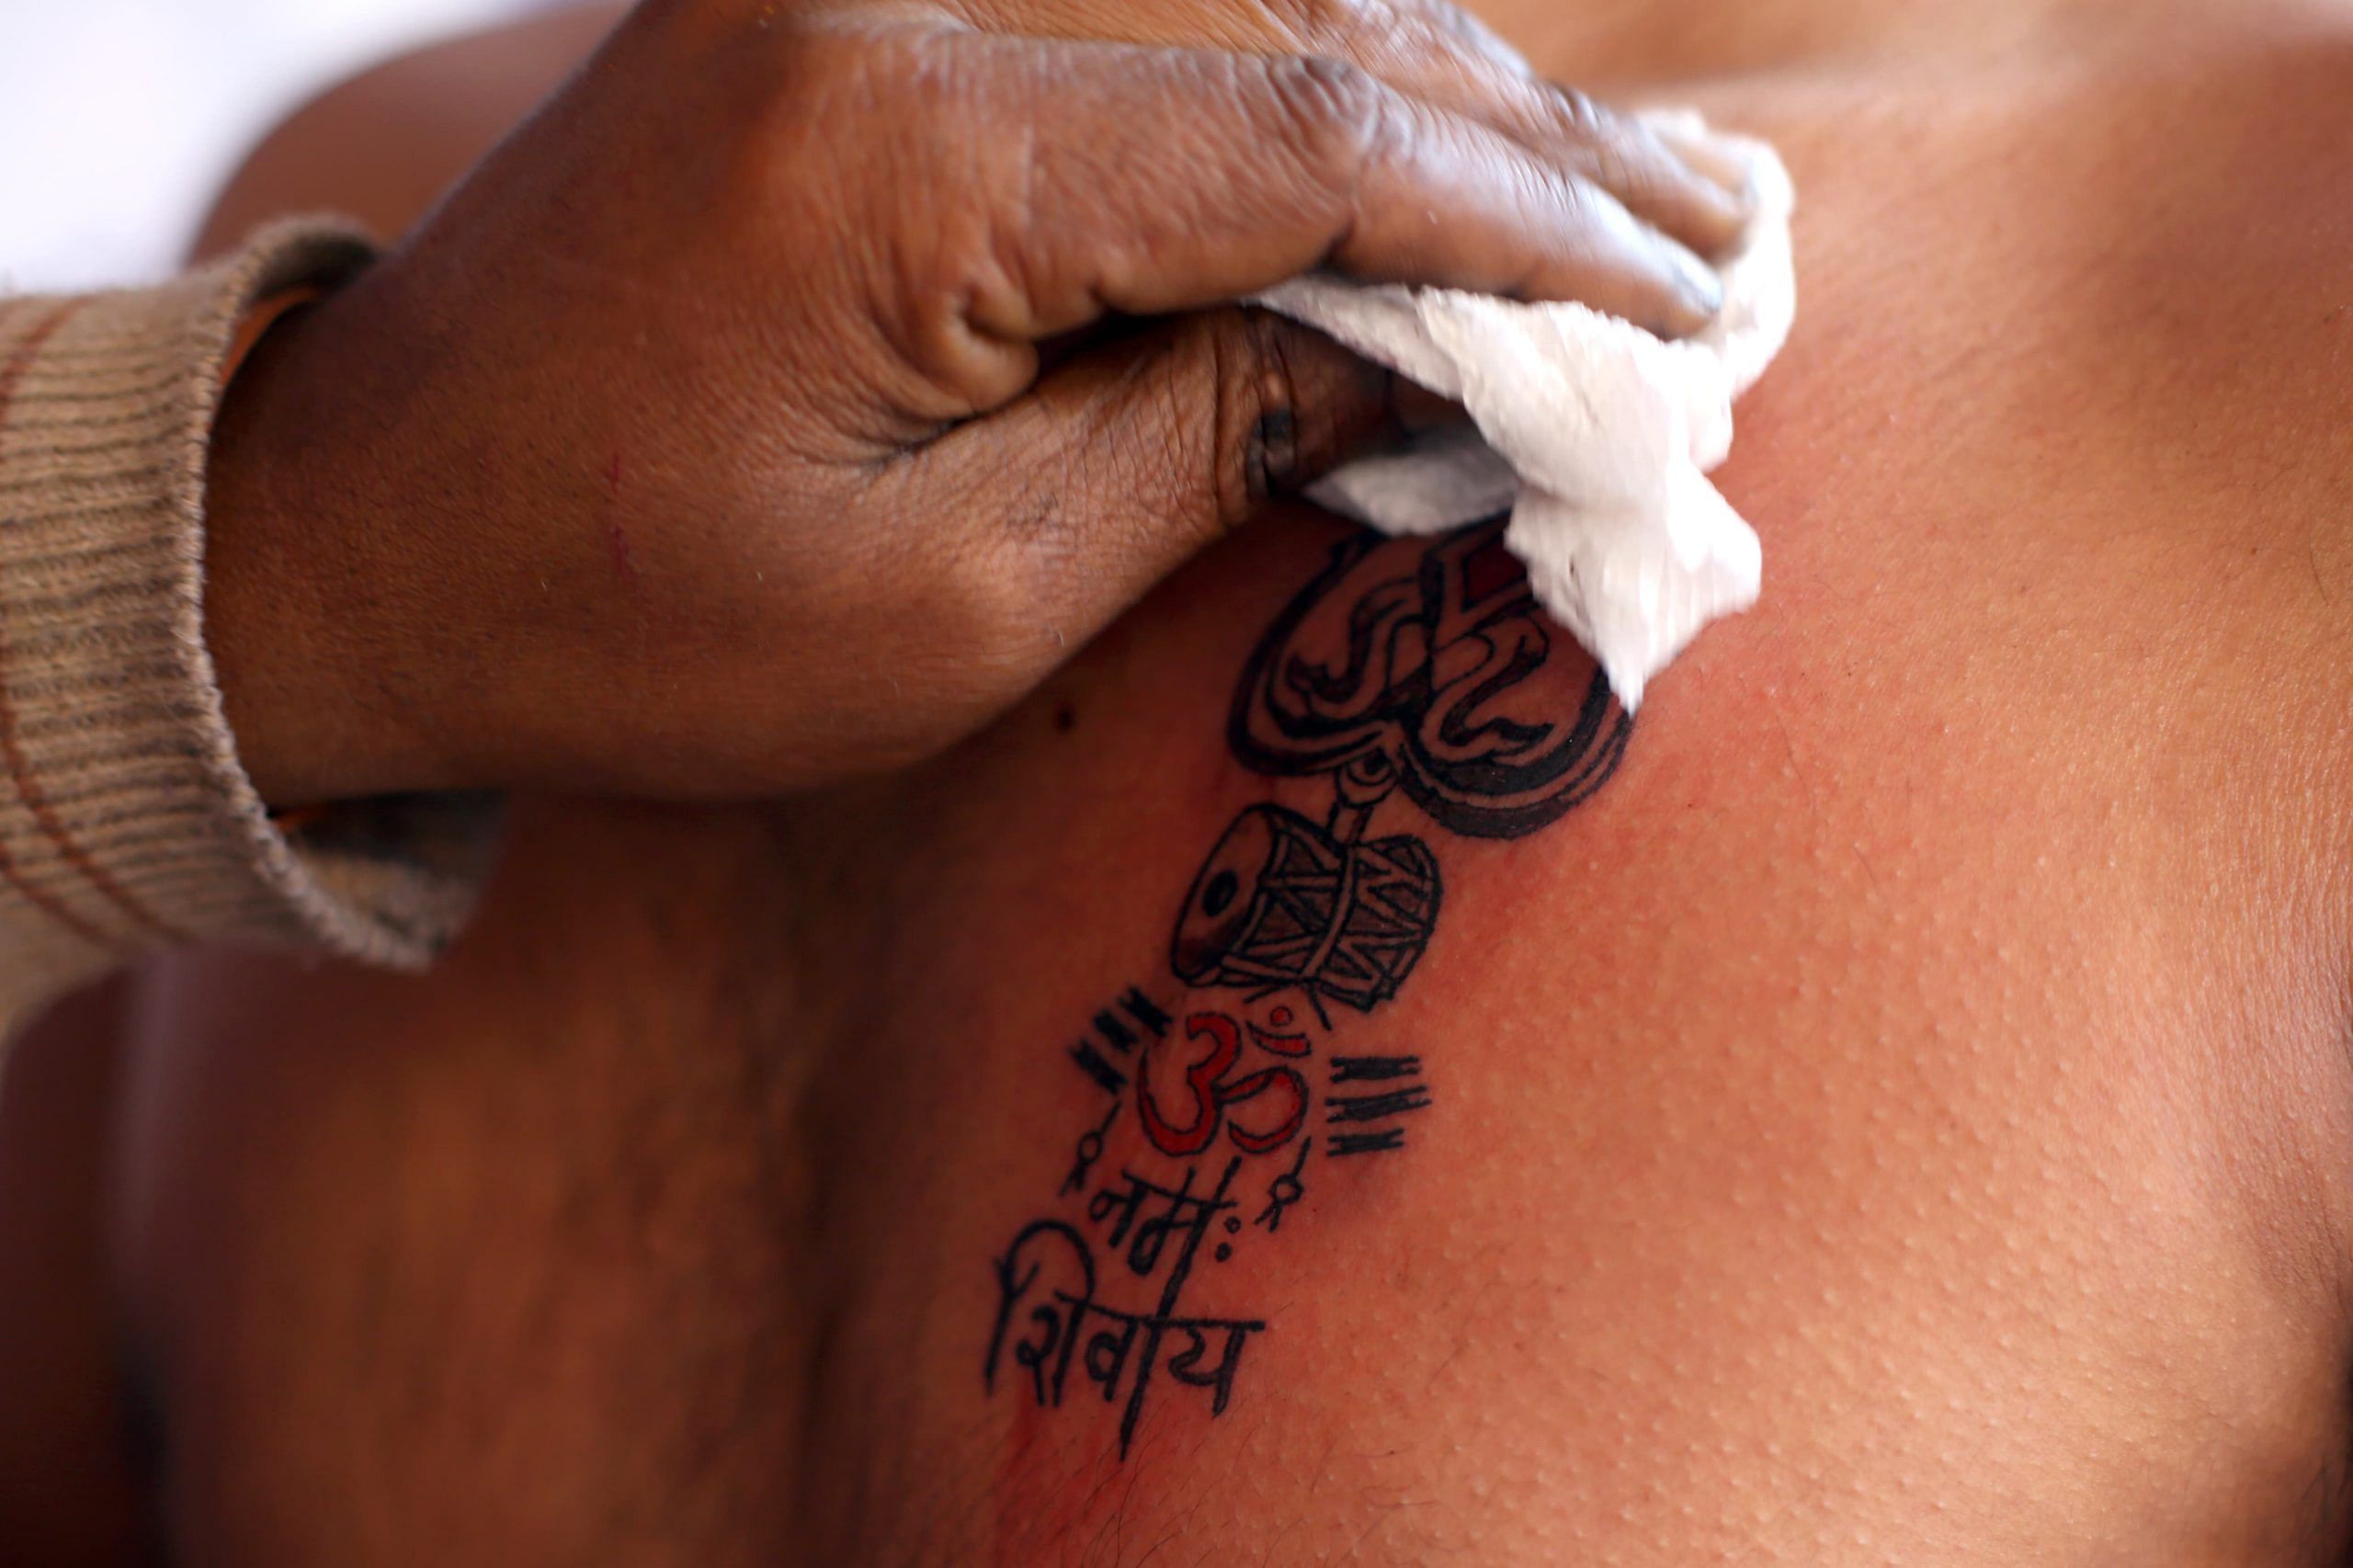 A devotee gets a tattoo on his chest | Photo: Suraj Singh Bisht | ThePrint